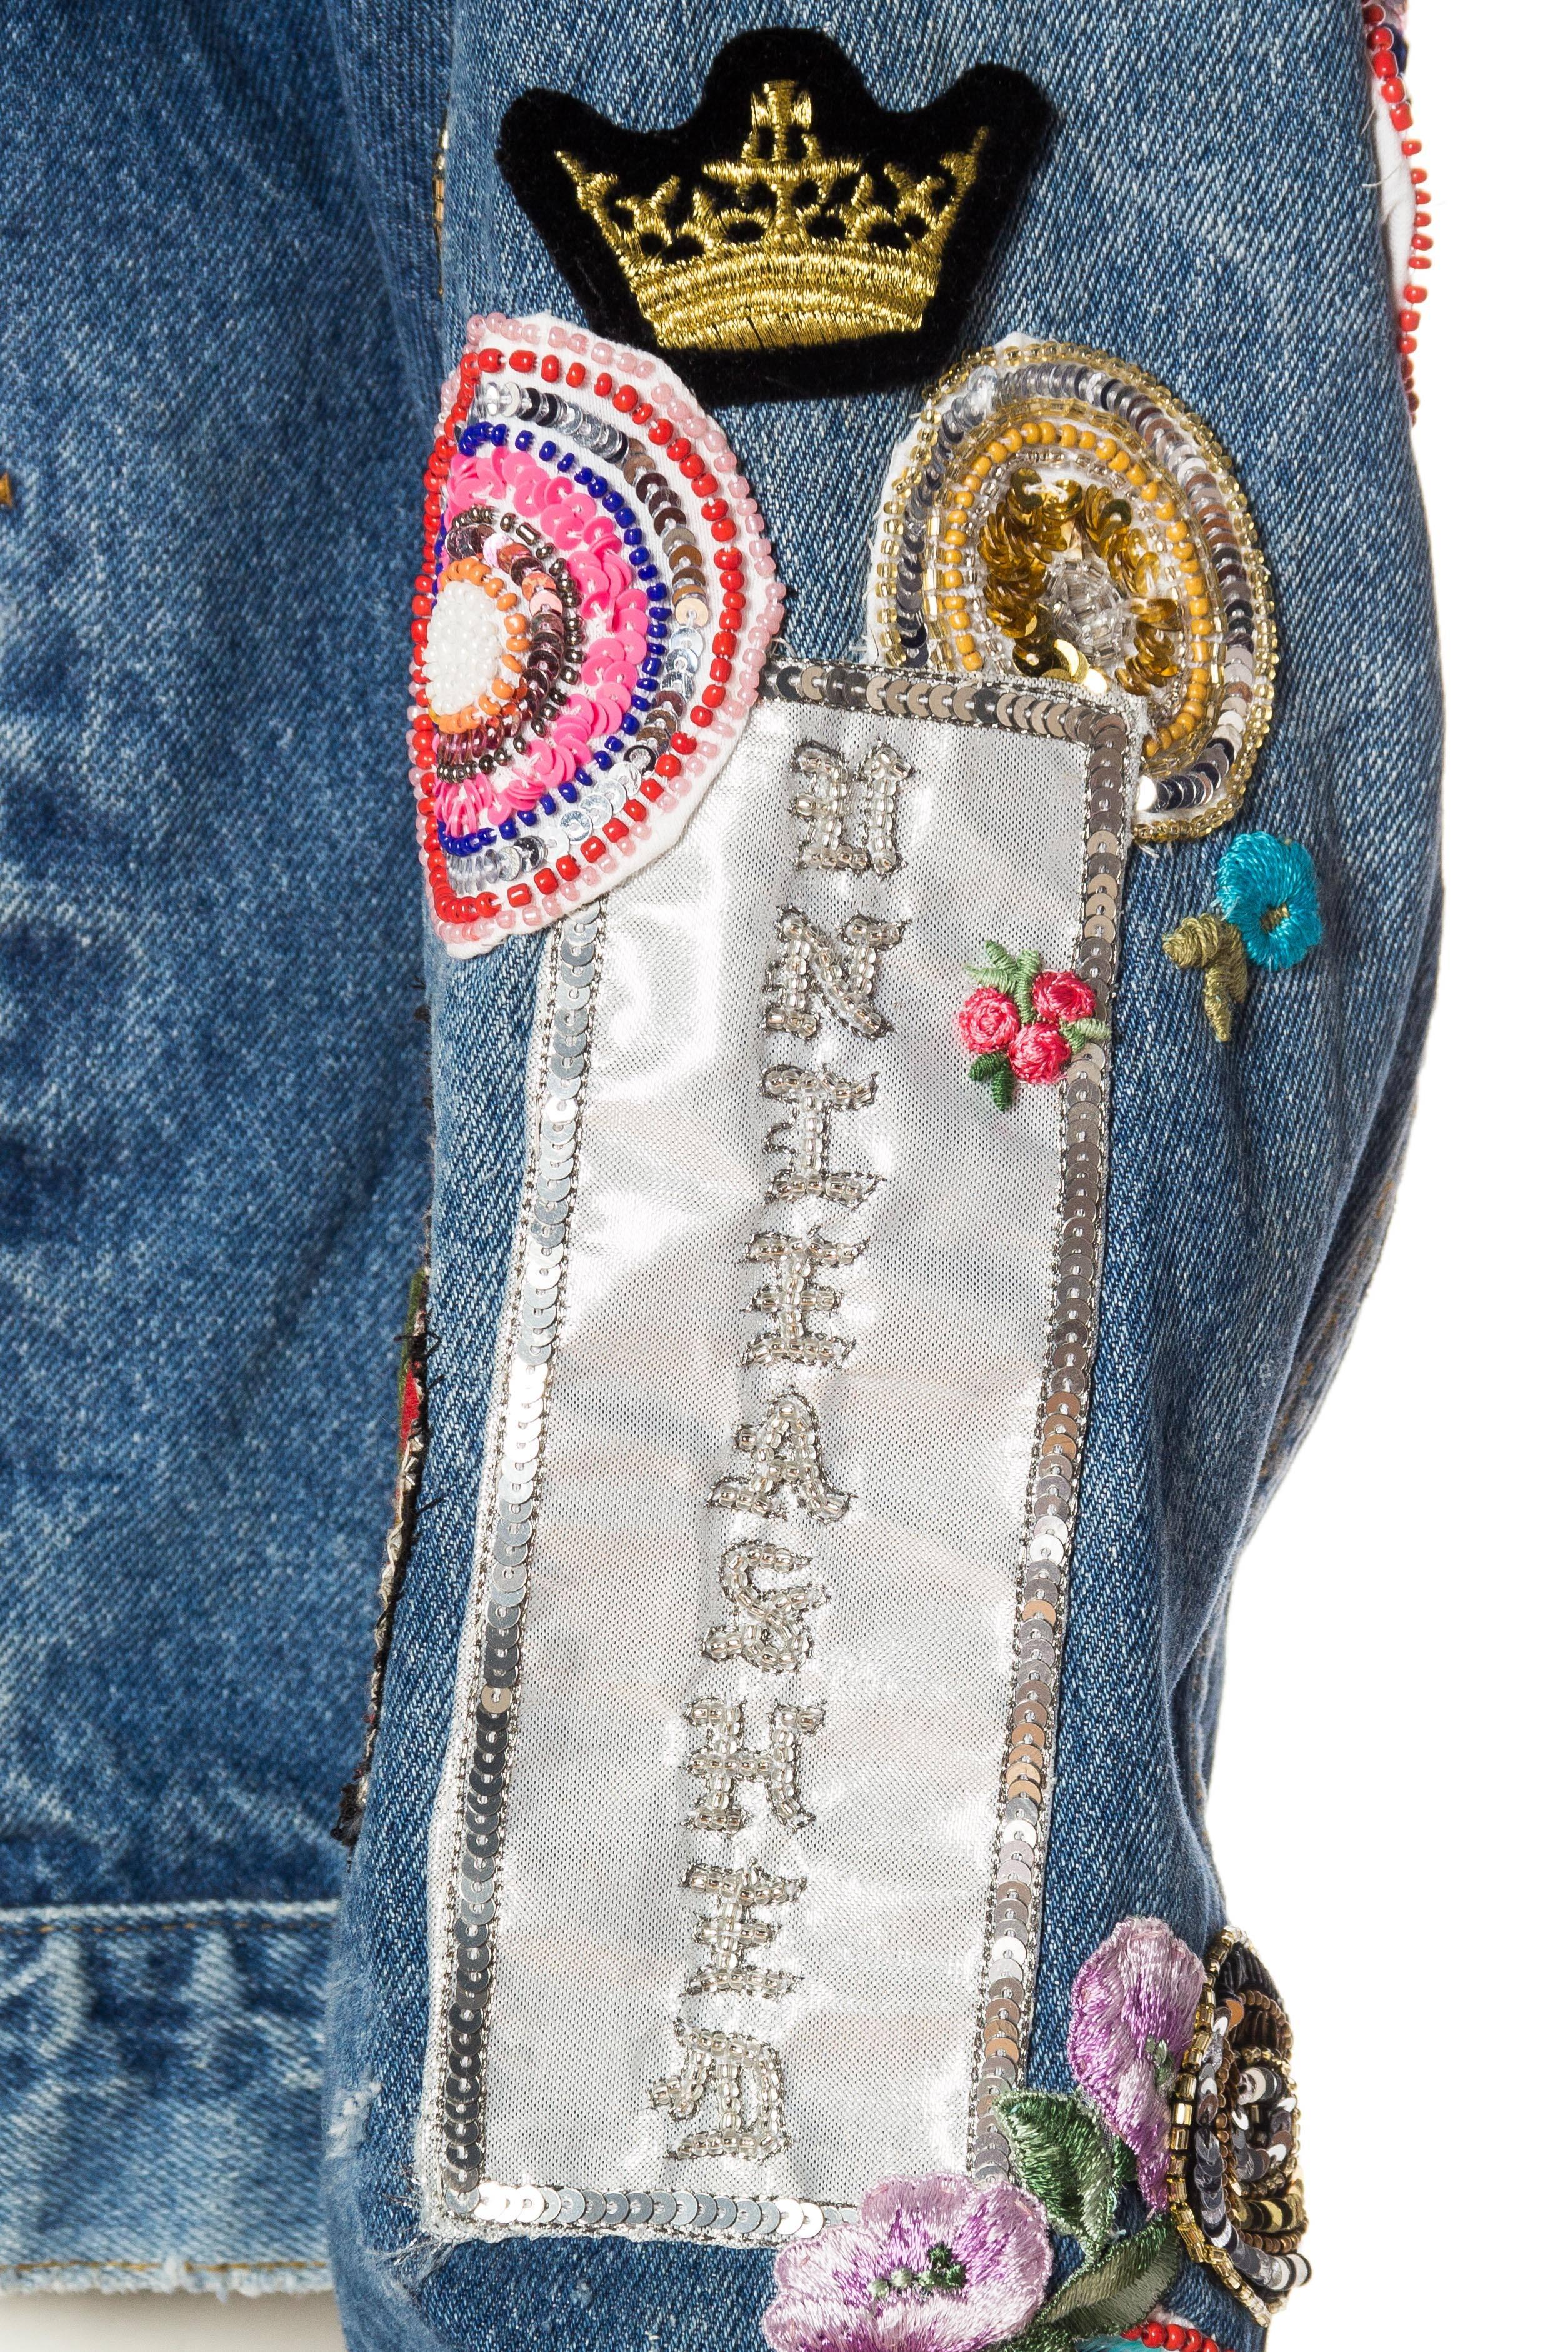 Gucci style embellished Levi jean jacket, Unleased collaboration at ...